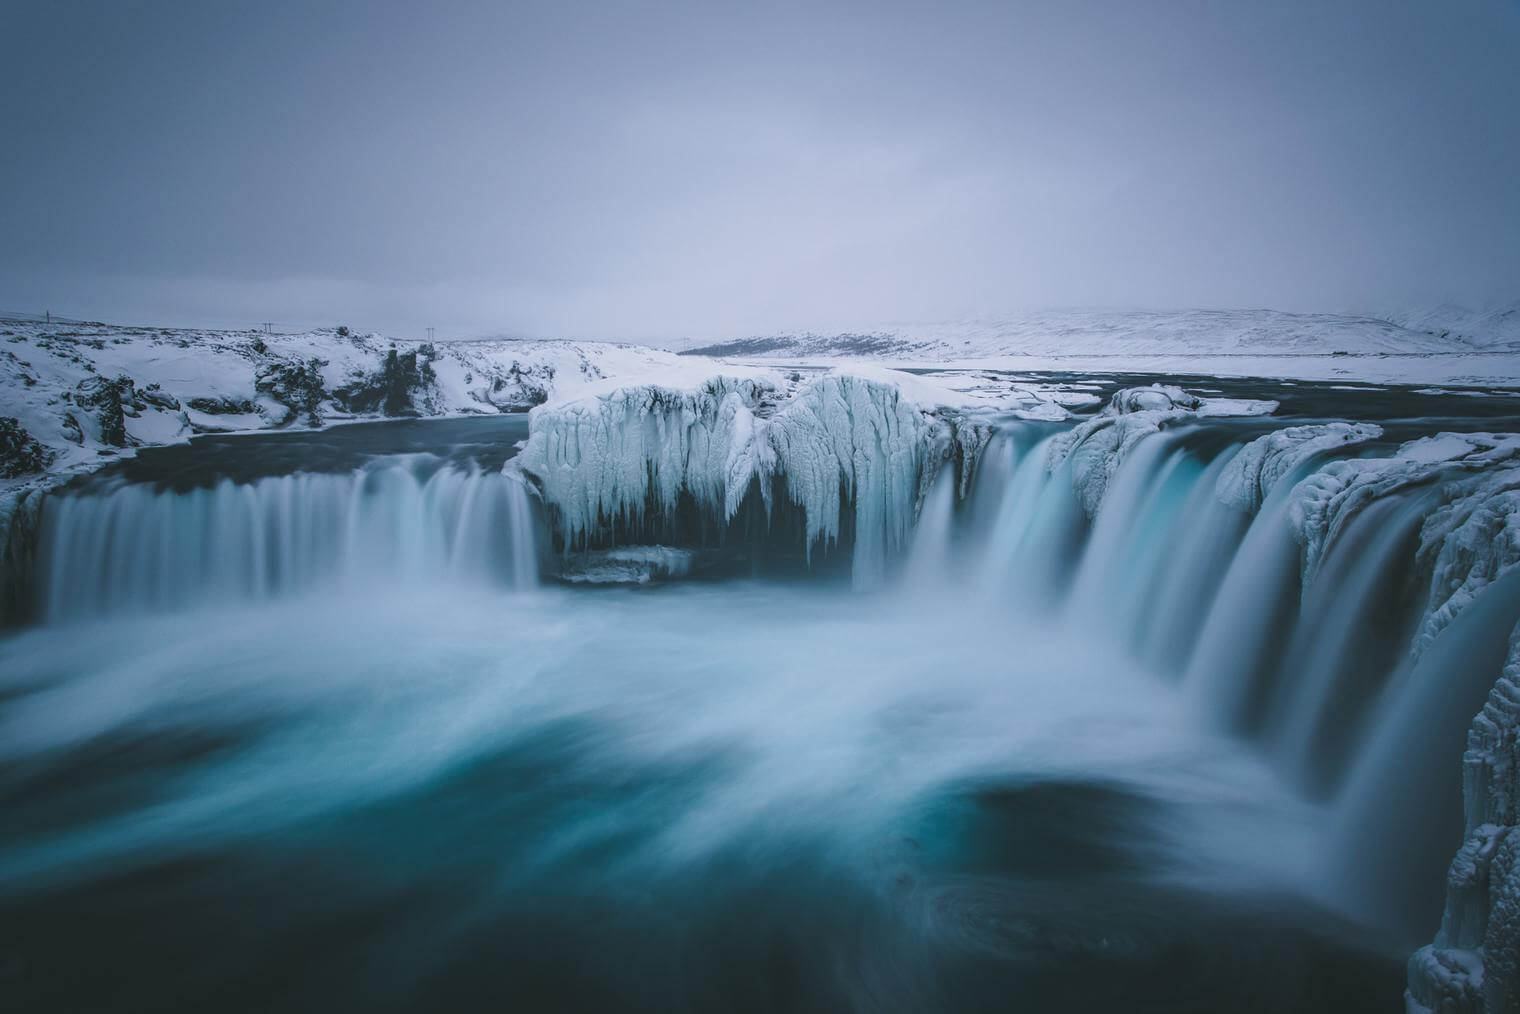 Godafoss Waterfall in Iceland in Winter - Edited with Northlandscapes Signature Lightroom Presets